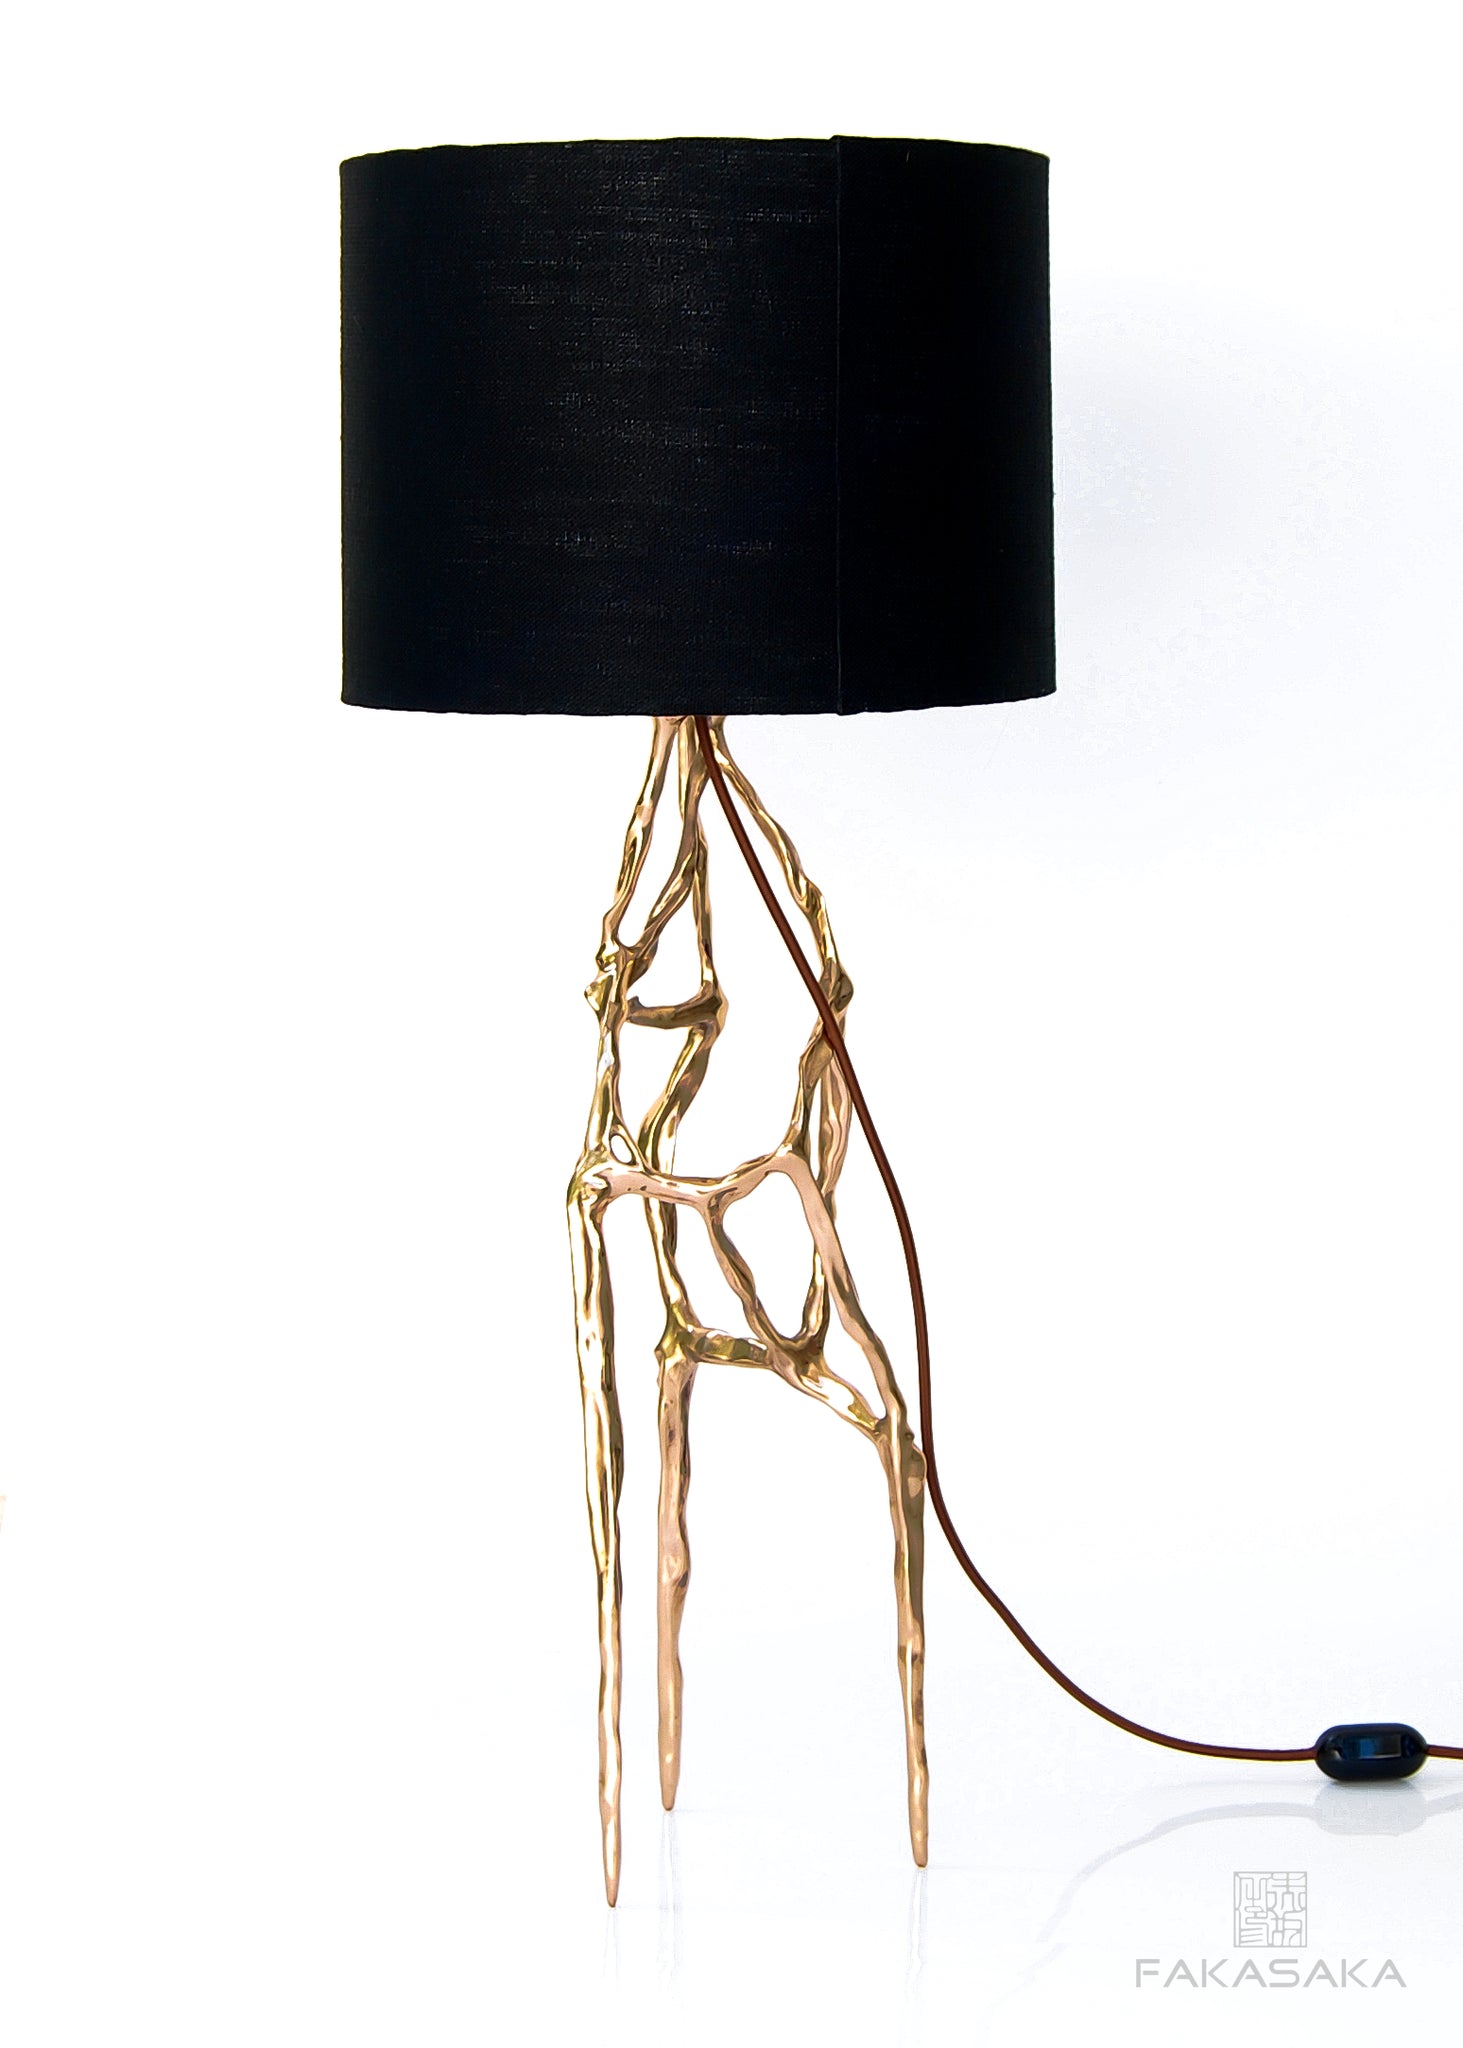 ALEXIA TABLE LAMP<br><br>BLACK LINEN SHADE<br>POLISHED BRONZE